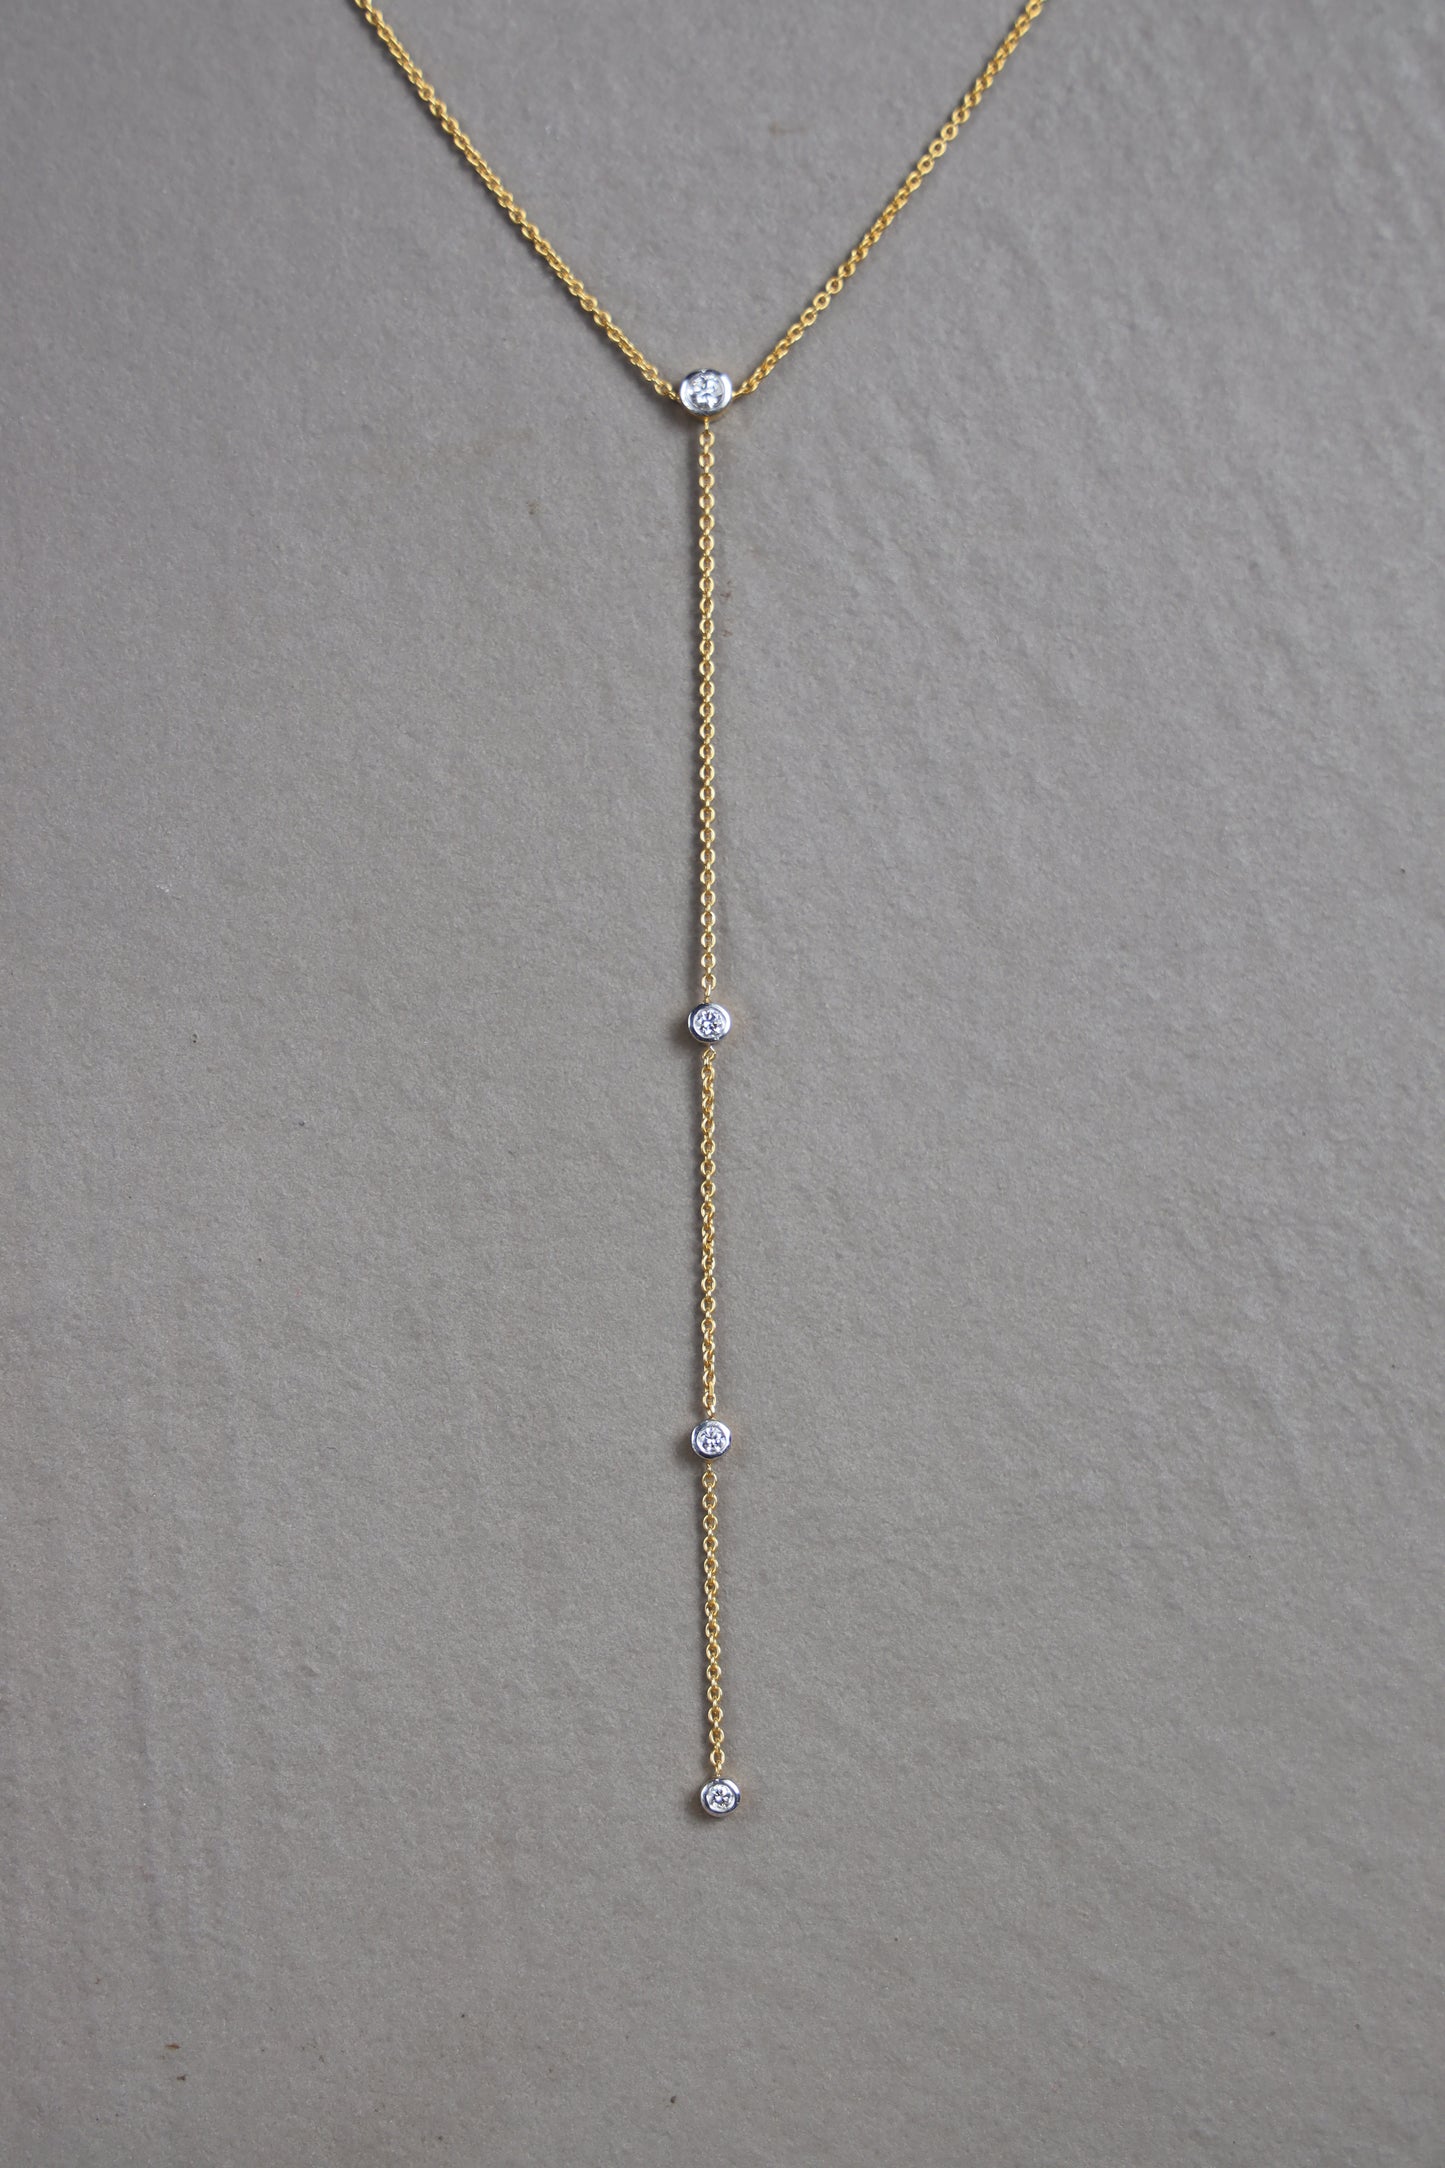 Petite Pearl and Diamond Lariat Necklace